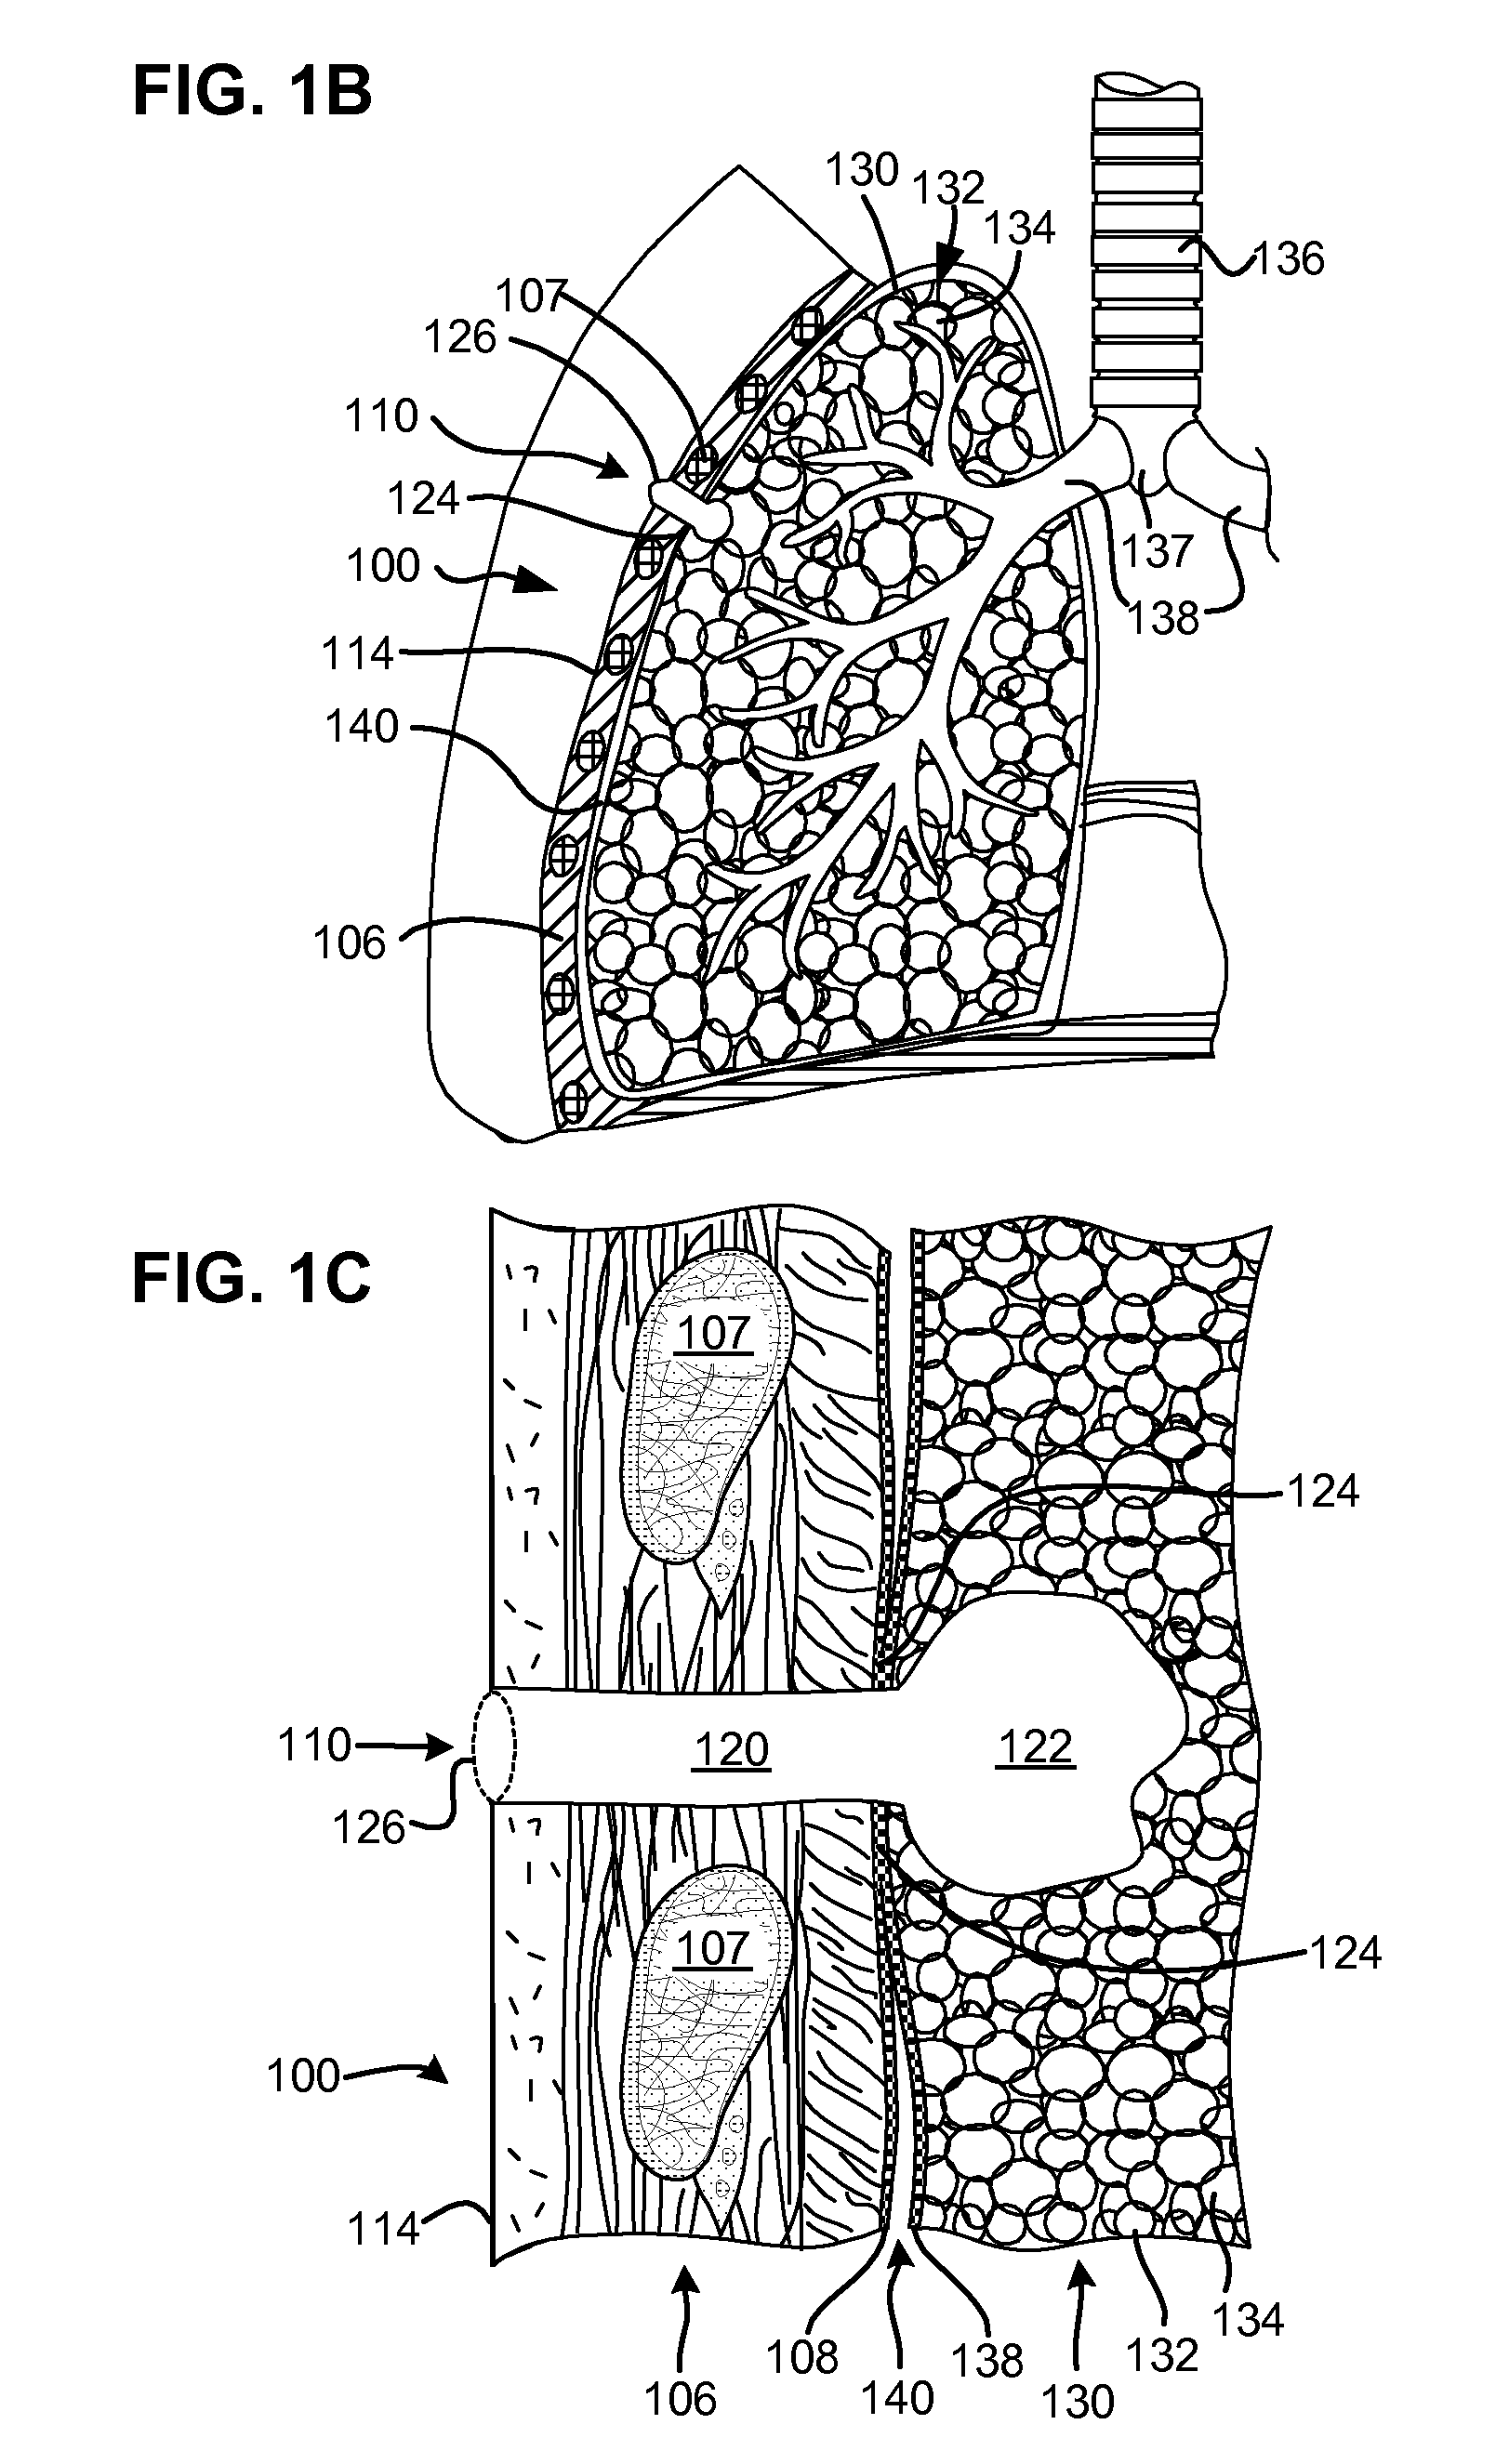 Surgical instruments for creating a pneumostoma and treating chronic obstructive pulmonary disease